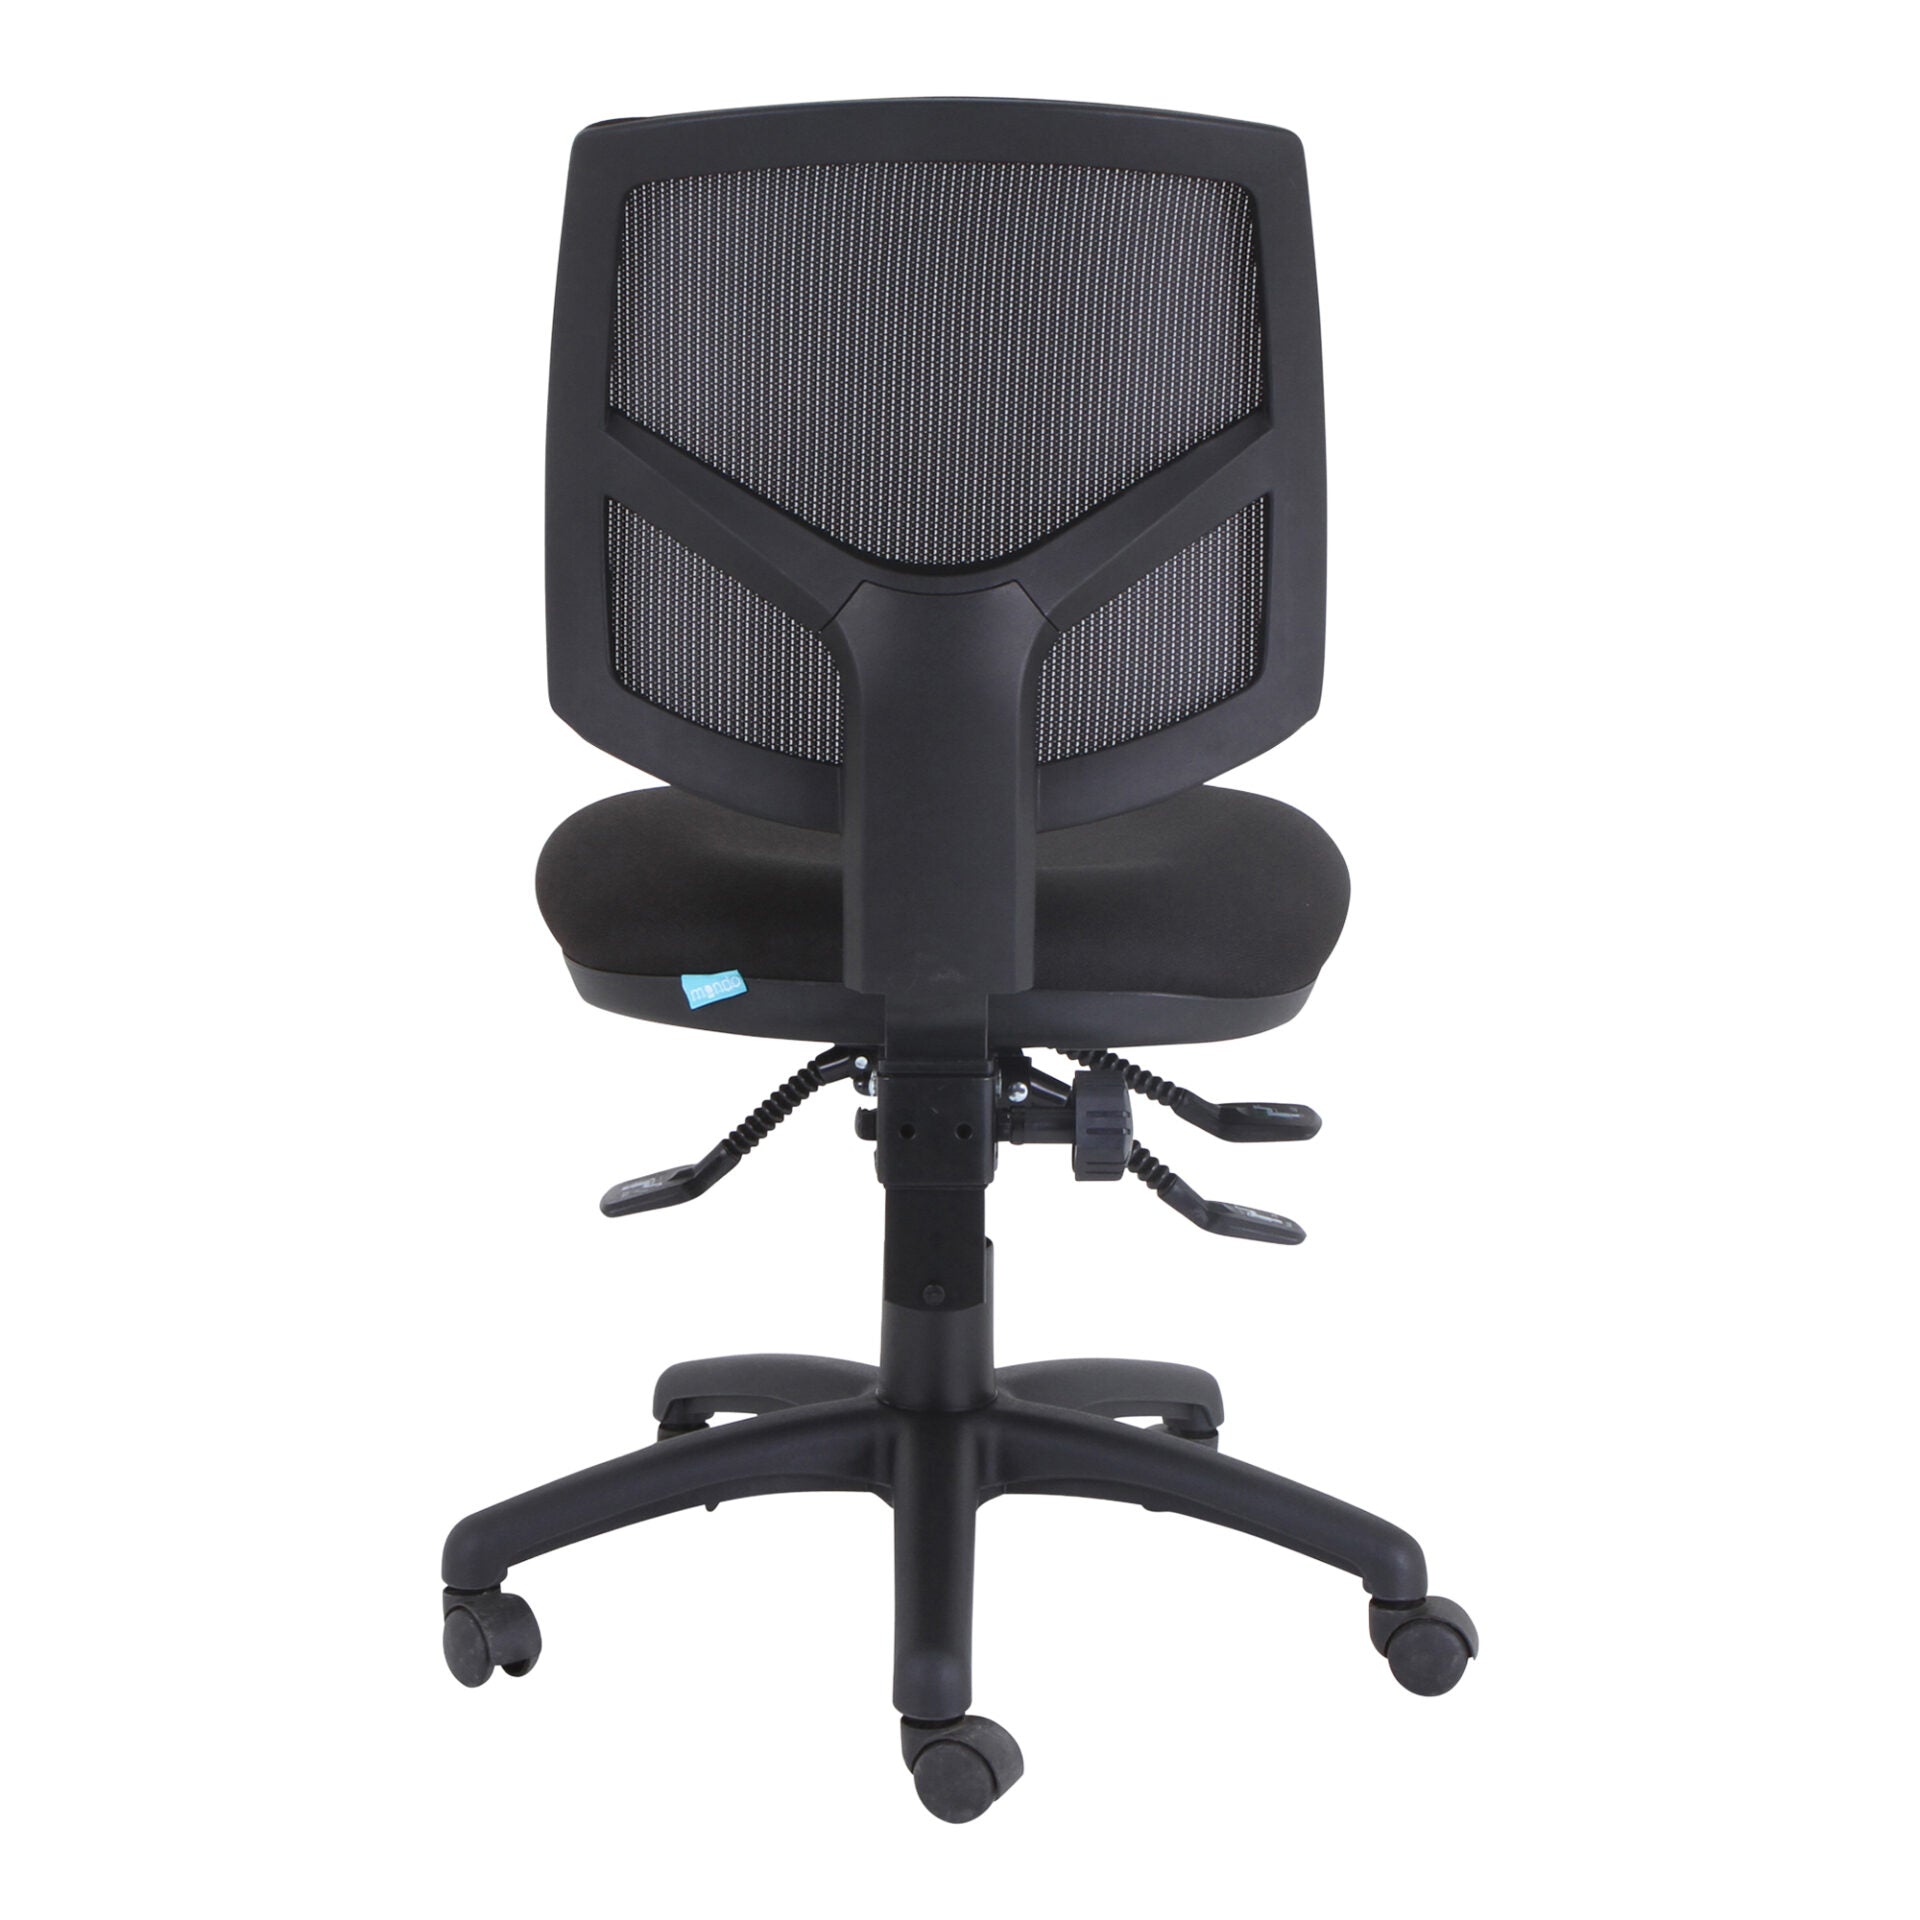 Mondo Java mesh-back office chair in black, back view.